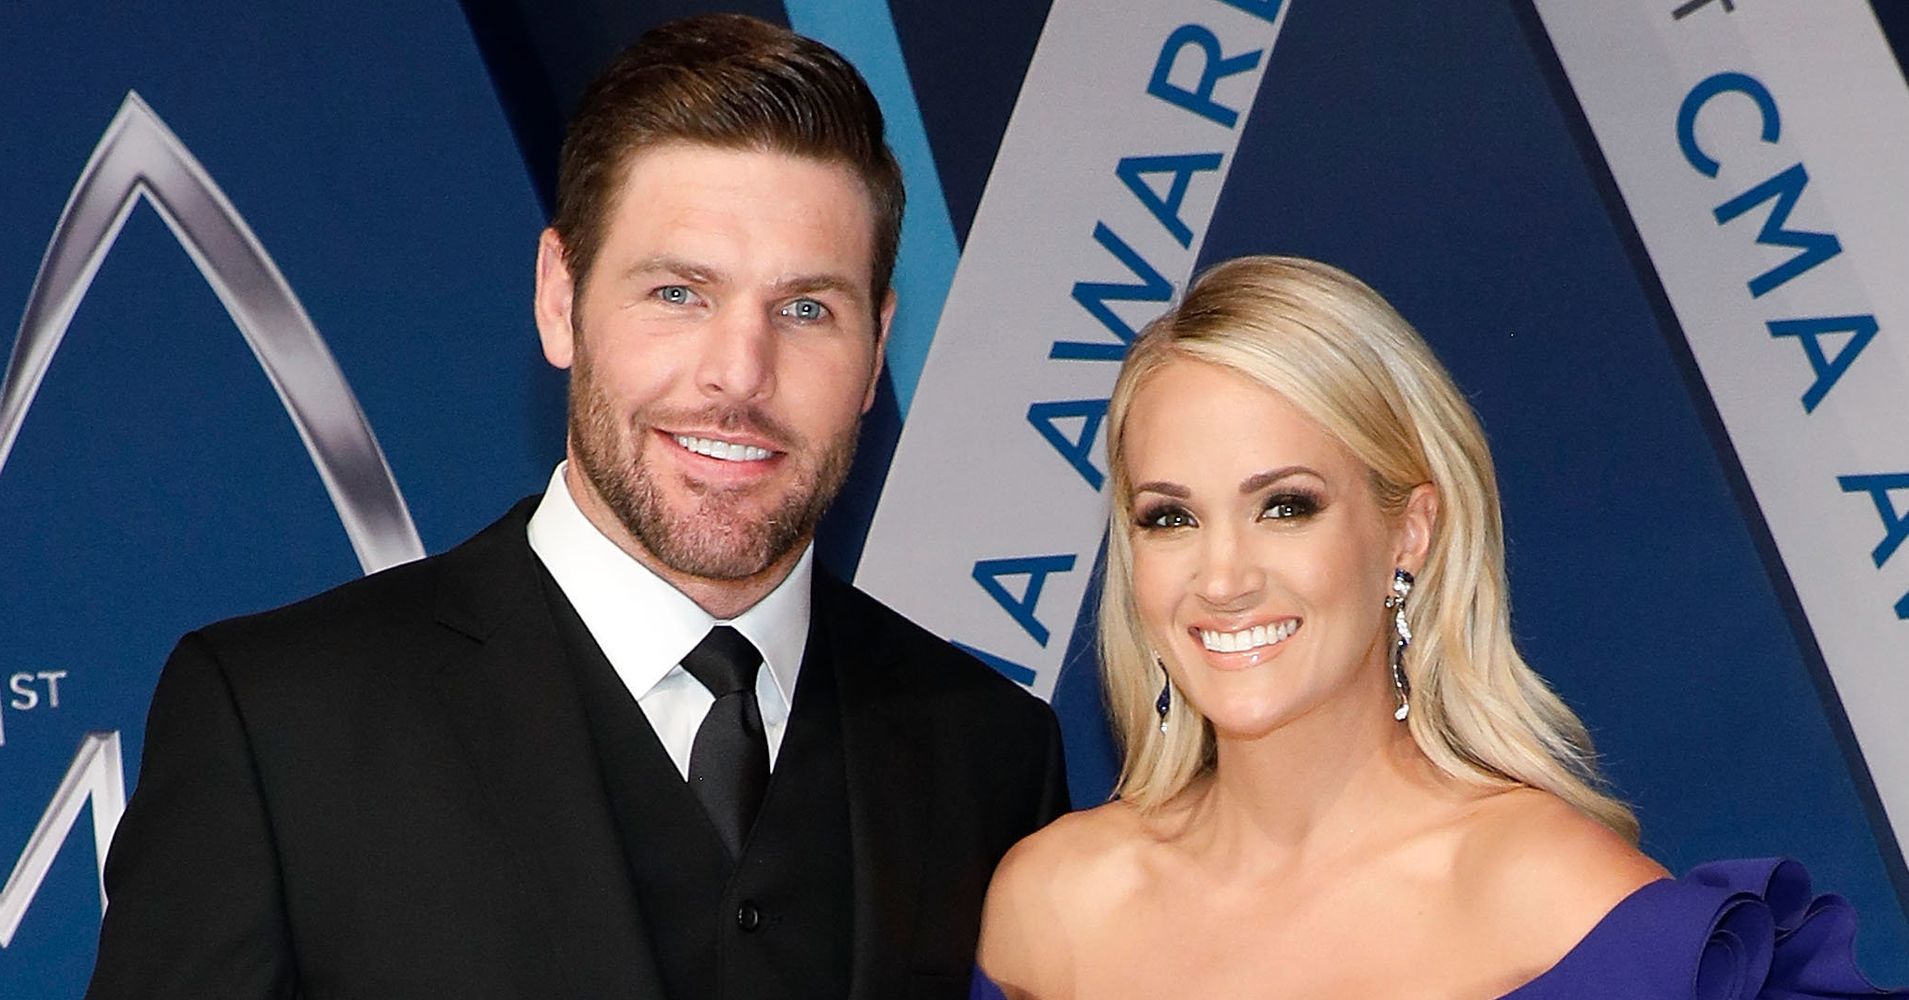 Carrie Underwood Reveals She's Pregnant With 2nd Child HuffPost